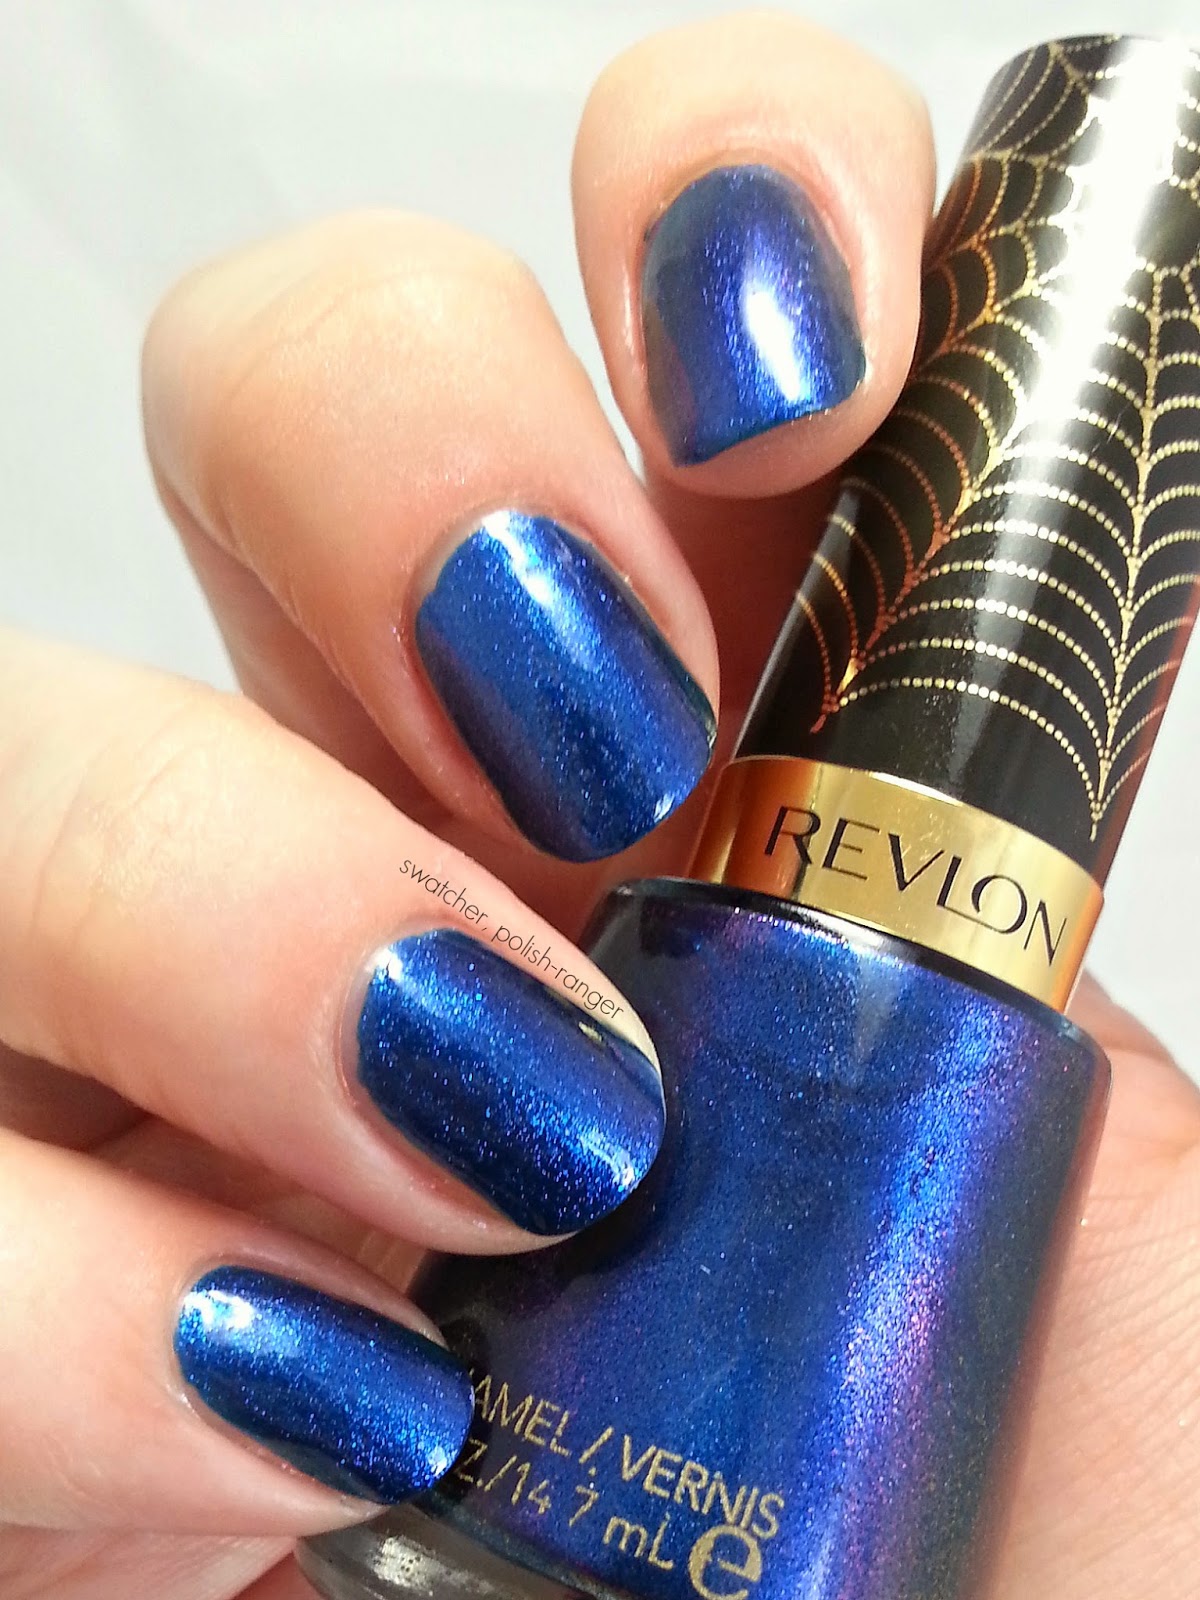 Revlon Electric Chrome Collection LE Super-Powered swatch